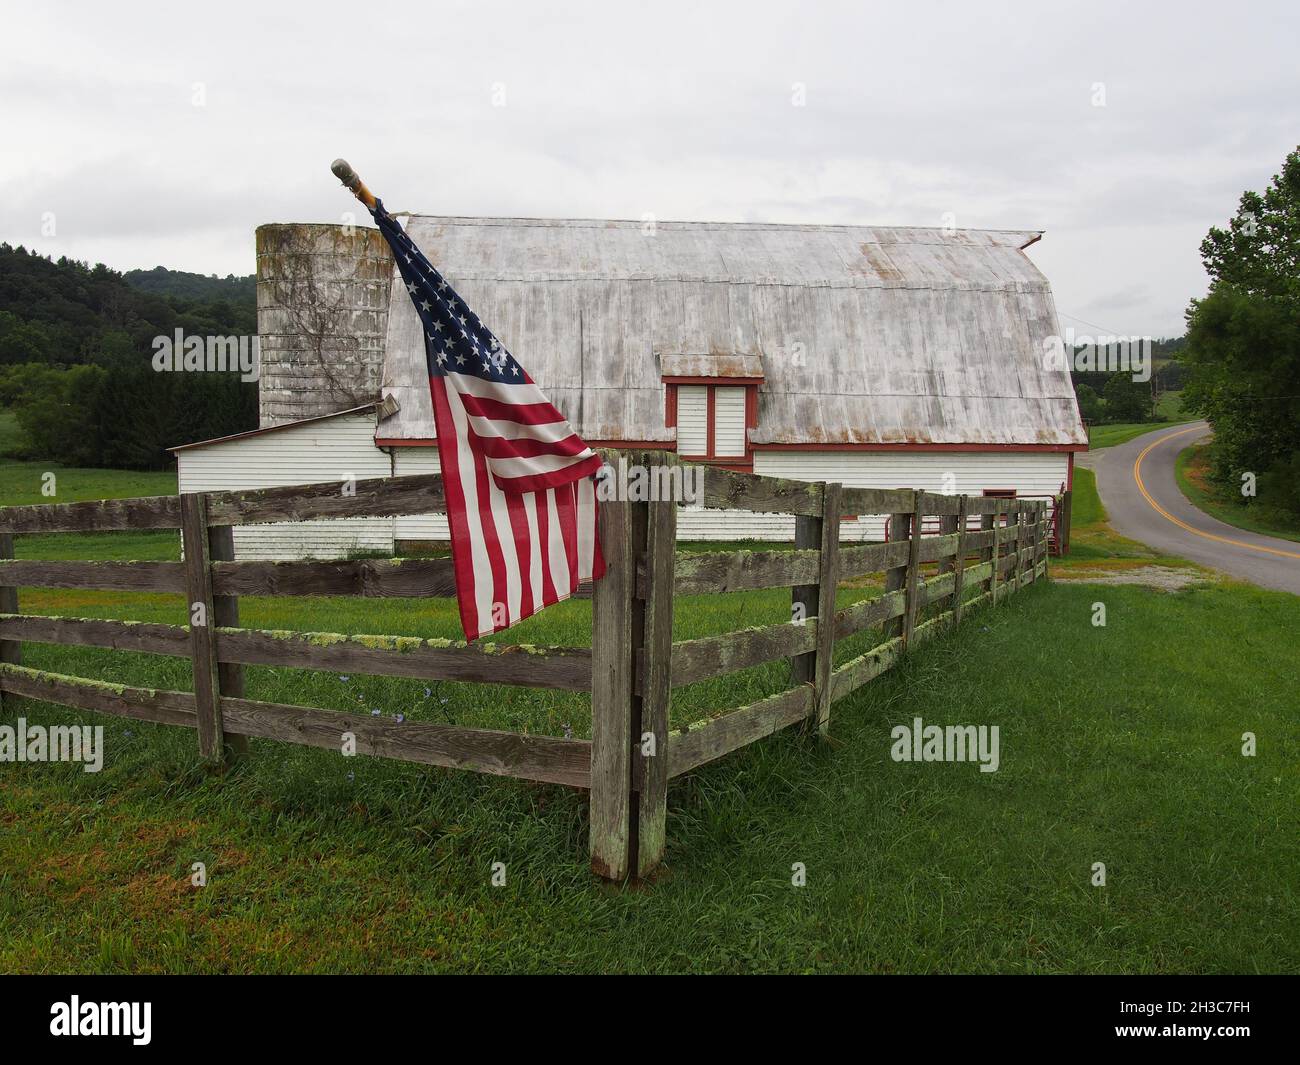 An American flag flies on a post-and-rail fence at an old barn in Virginia, USA, 2021 © Katharine Andriotis Stock Photo